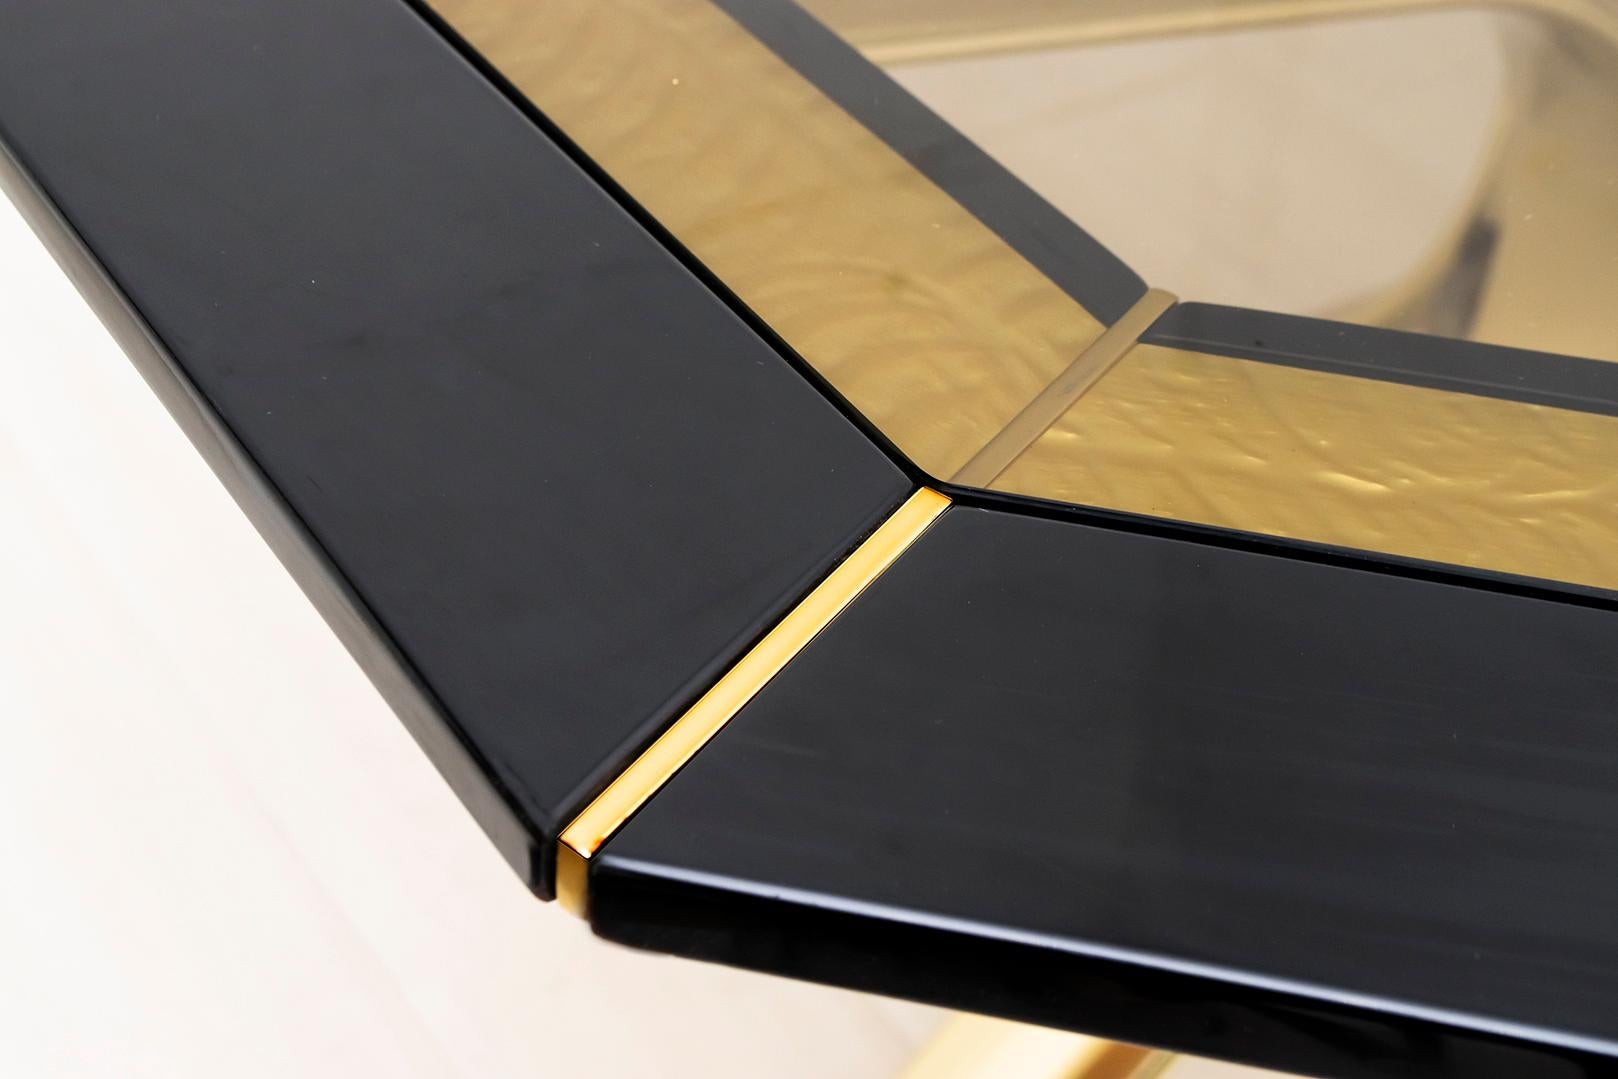 Pierre Cardin Octagonal Dining Table Black Lacquer with Brass Inserts and Base For Sale 3